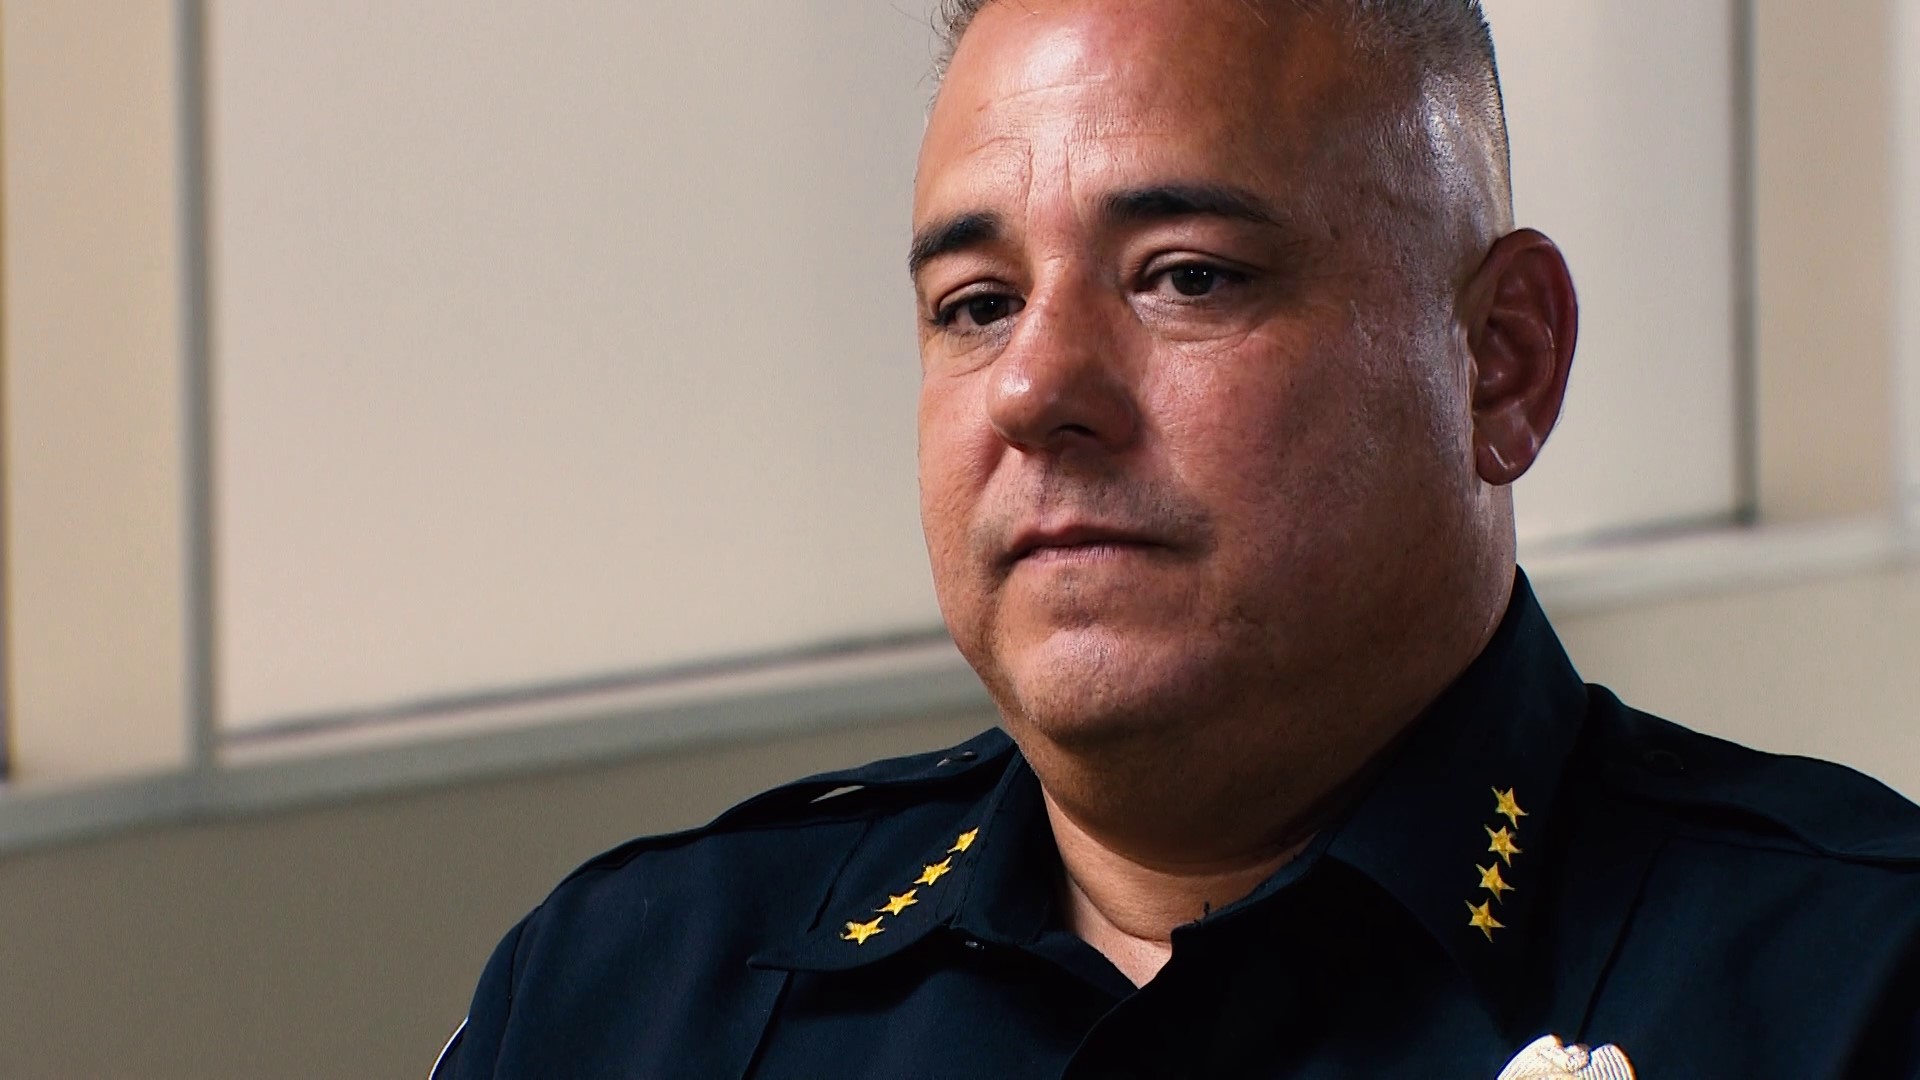 Coffee City leaders voted unanimously to fire Chief of Police JohnJay Portillo and to deactivate the entire department until a new chief could be hired.